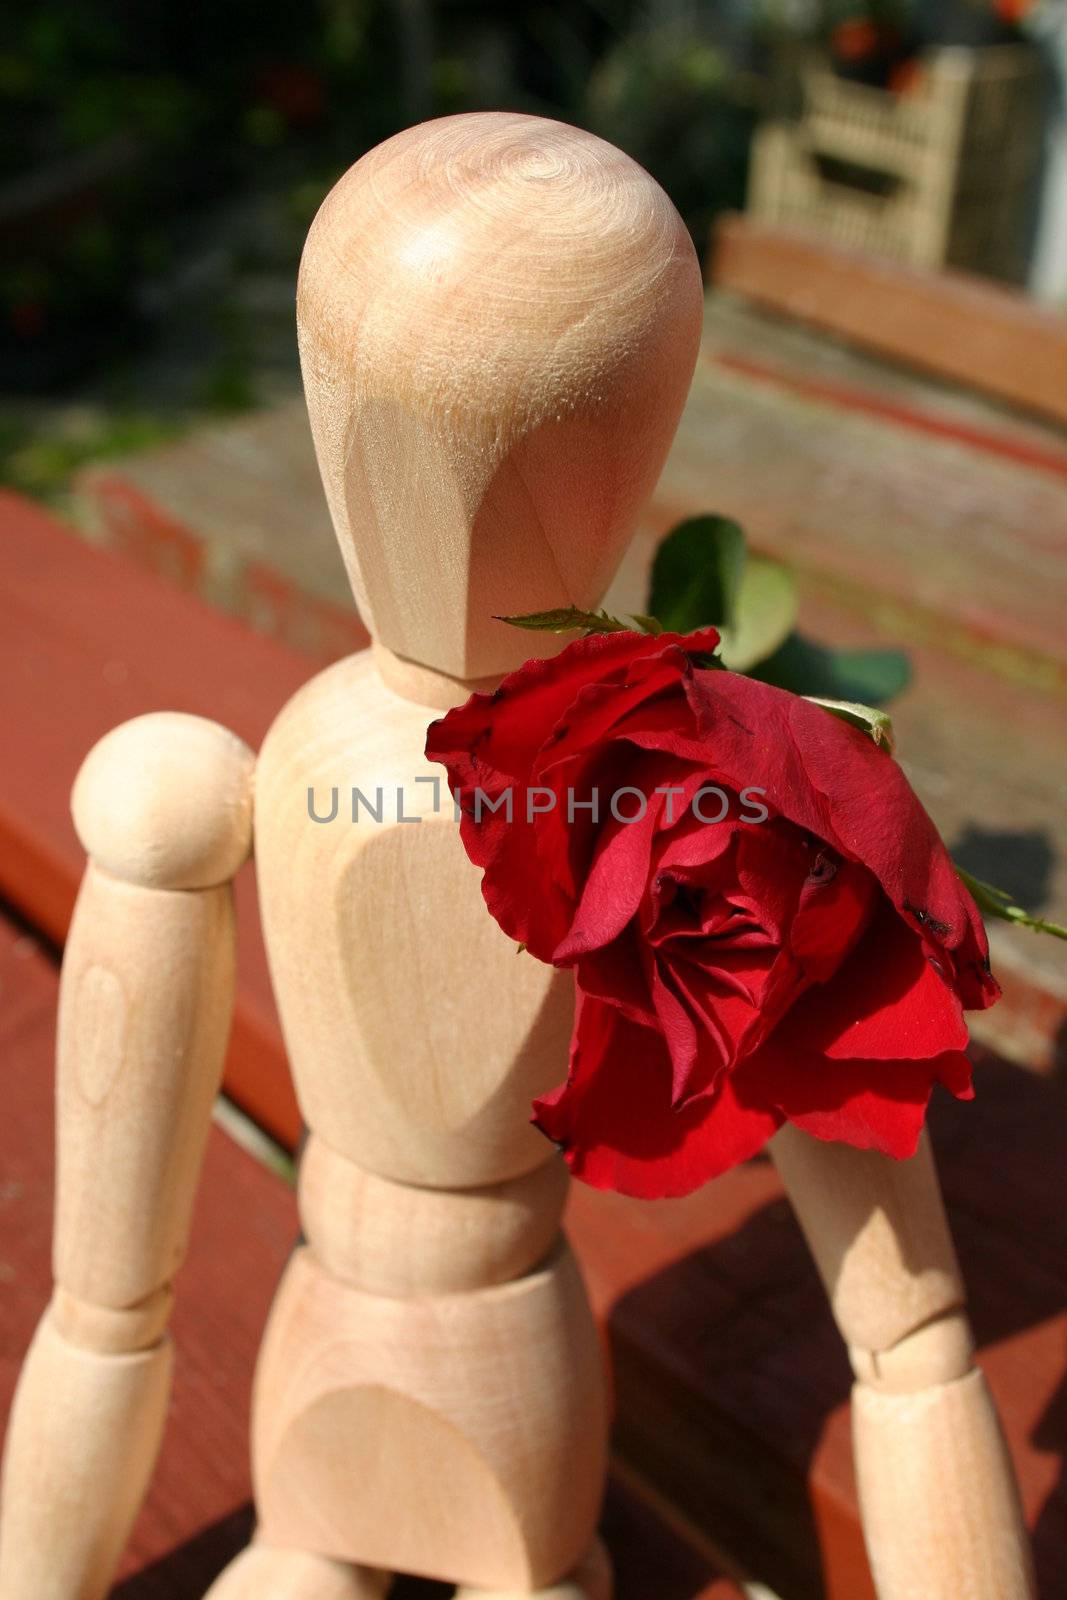 mannequin waiting for a loved one wearing his red rose on valentines day